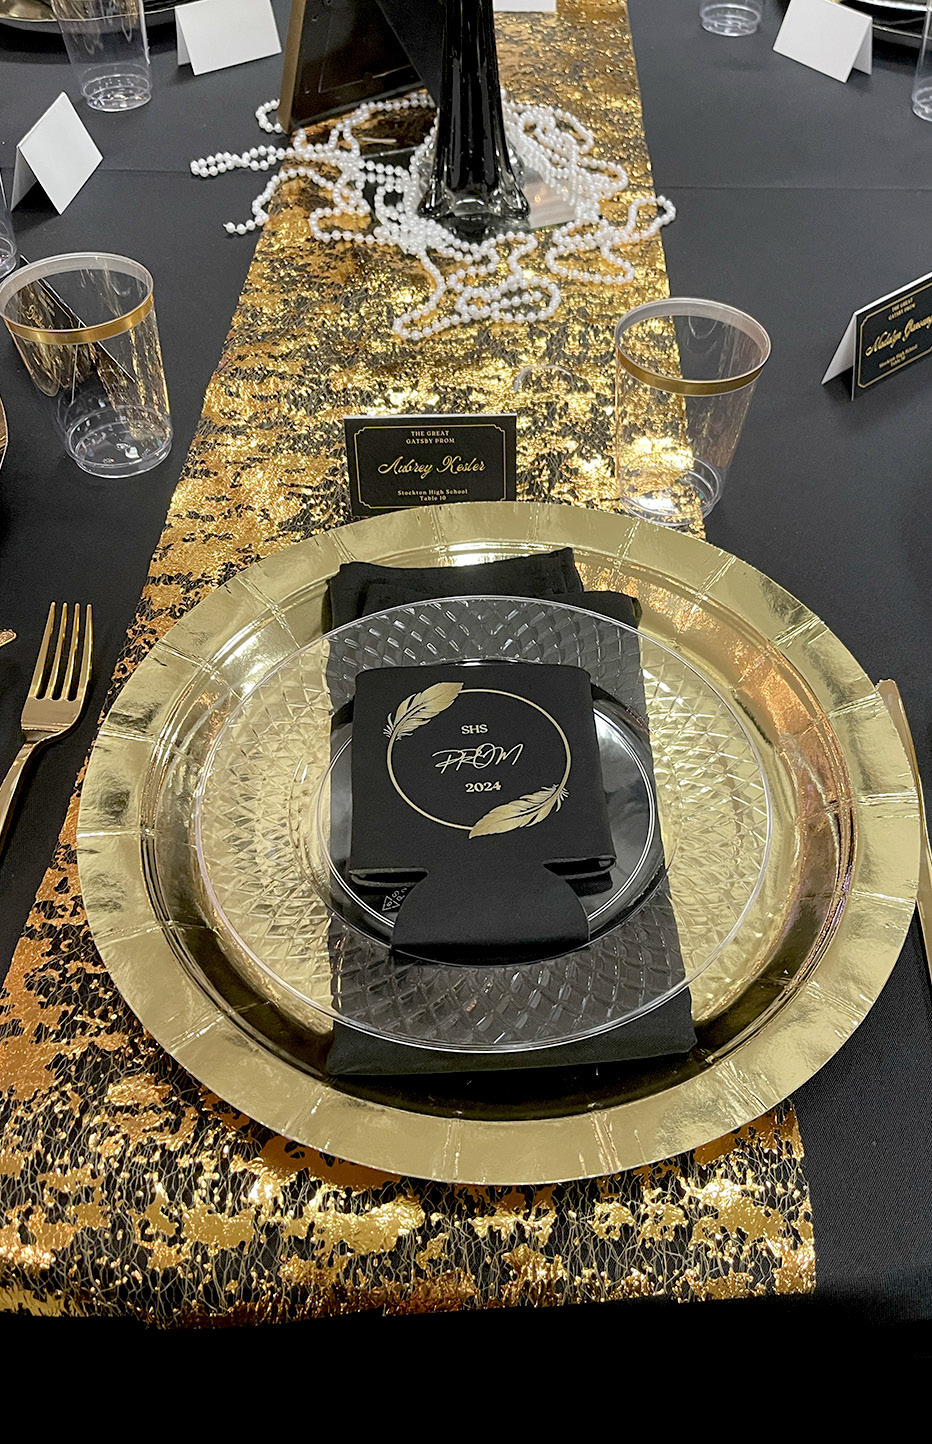 Table settings at this year’s Stockton High School Prom